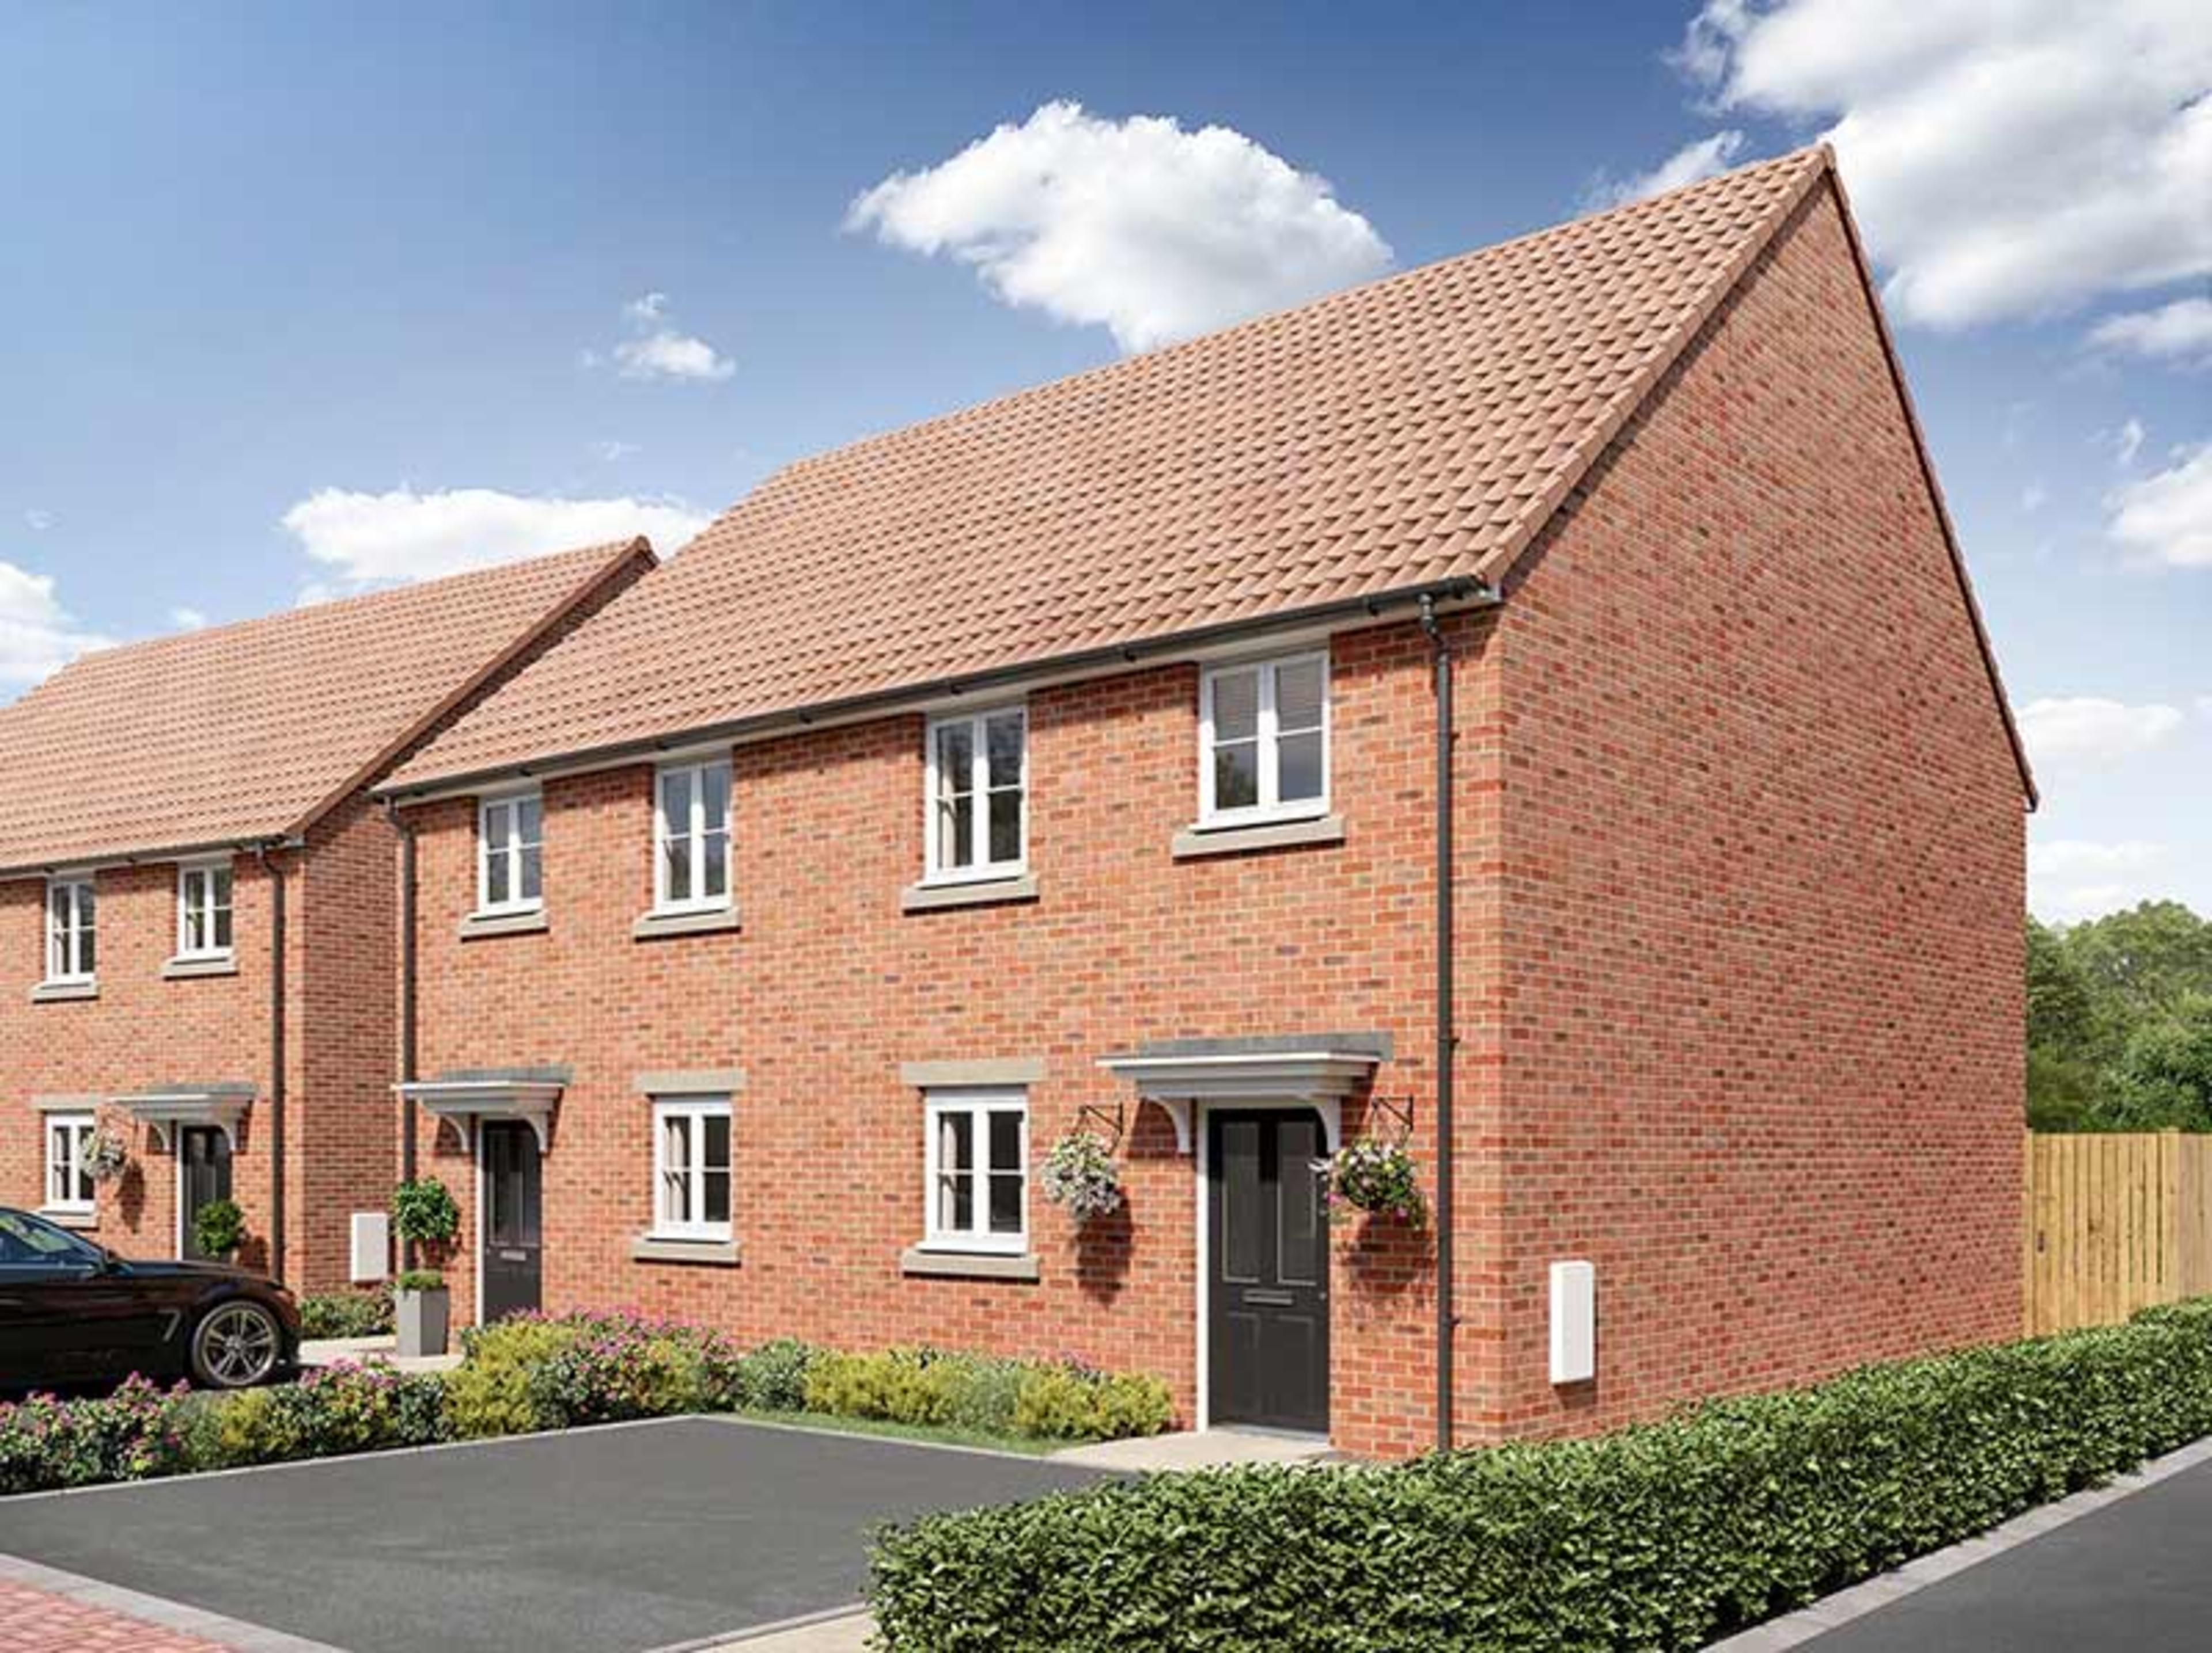 Exterior of the Lockwood - a semi-detached three bedroom home with a parking space to the front 